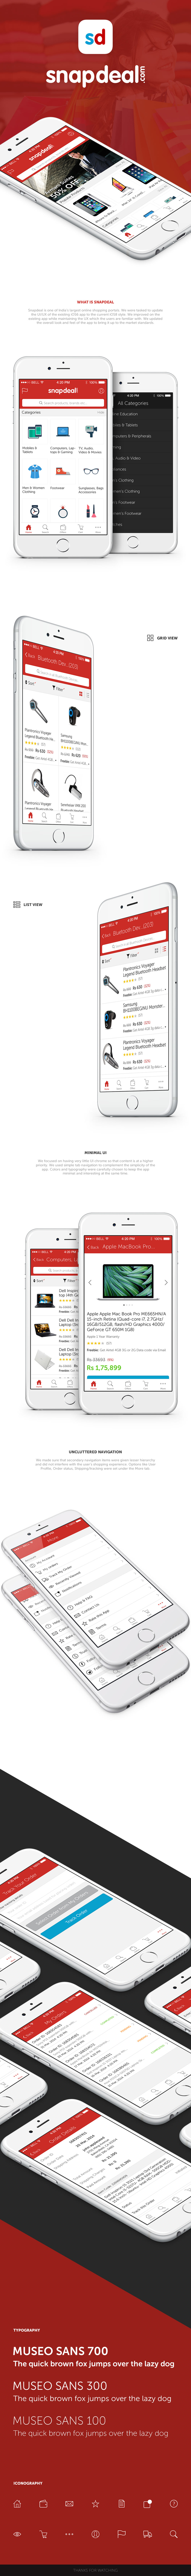 UI ux Snapdeal online shopping Shopping ios app mobile